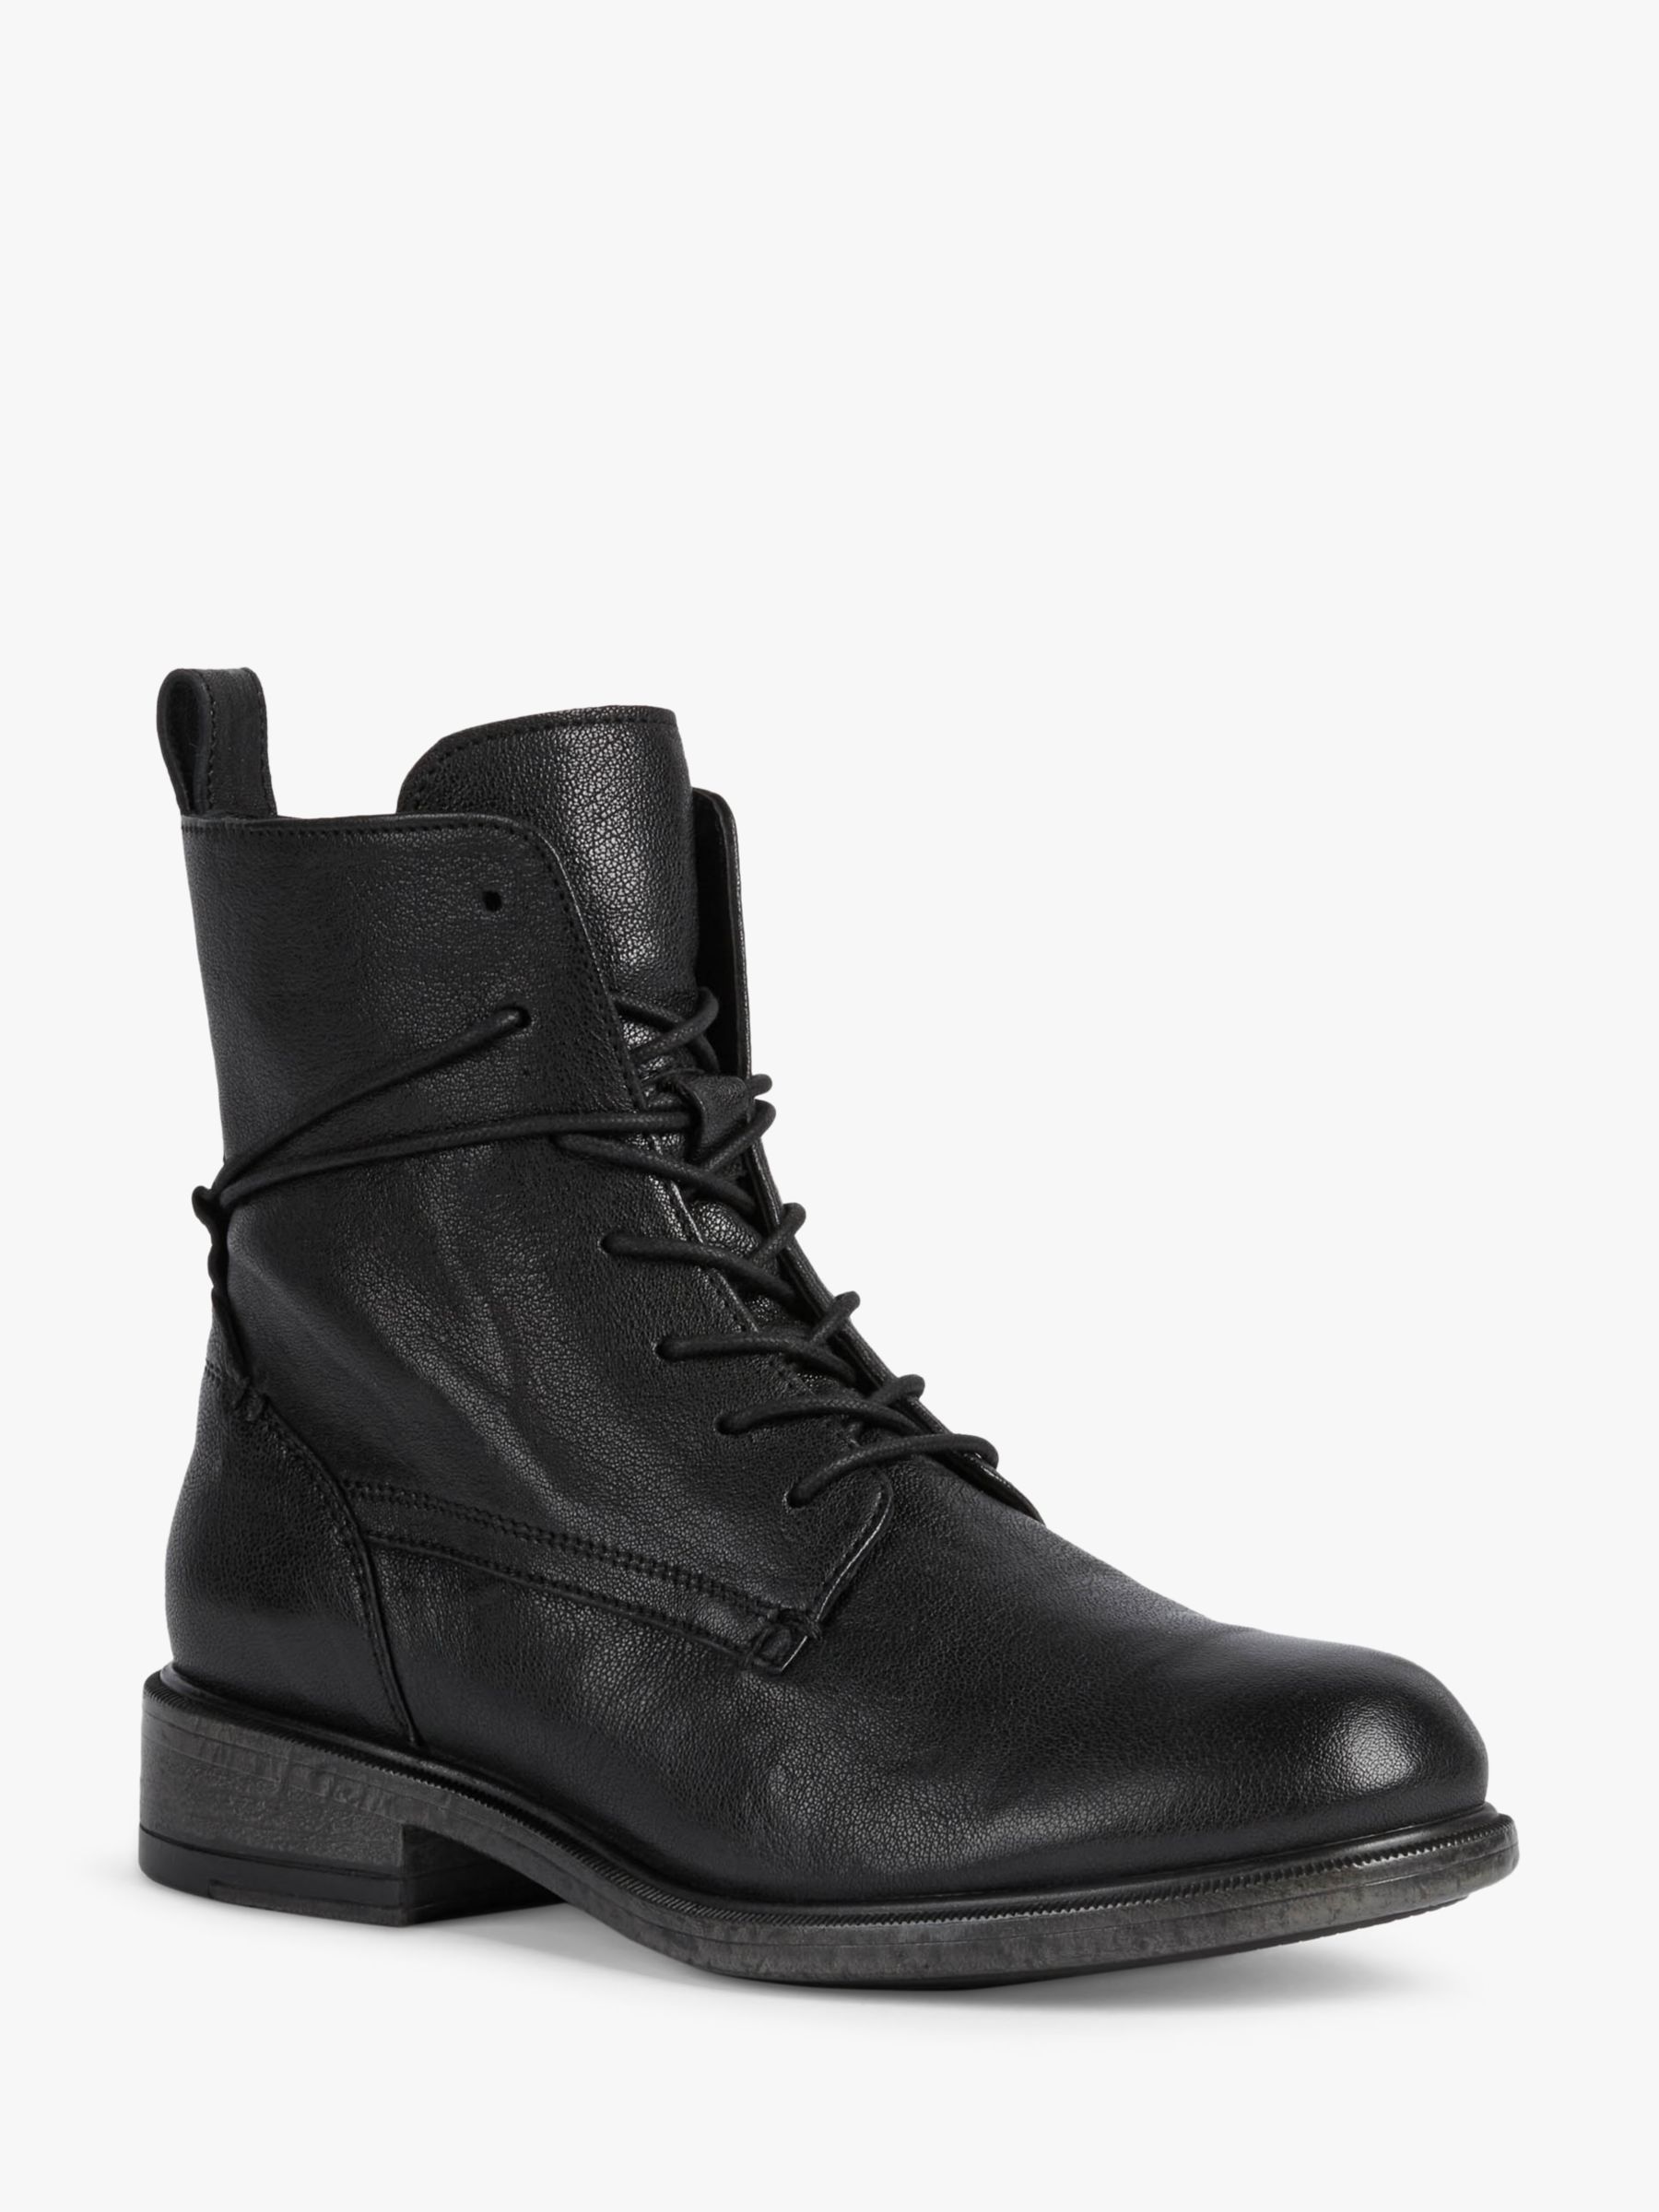 Geox Catria Leather Lace Up Ankle Boots, Black at John Lewis & Partners